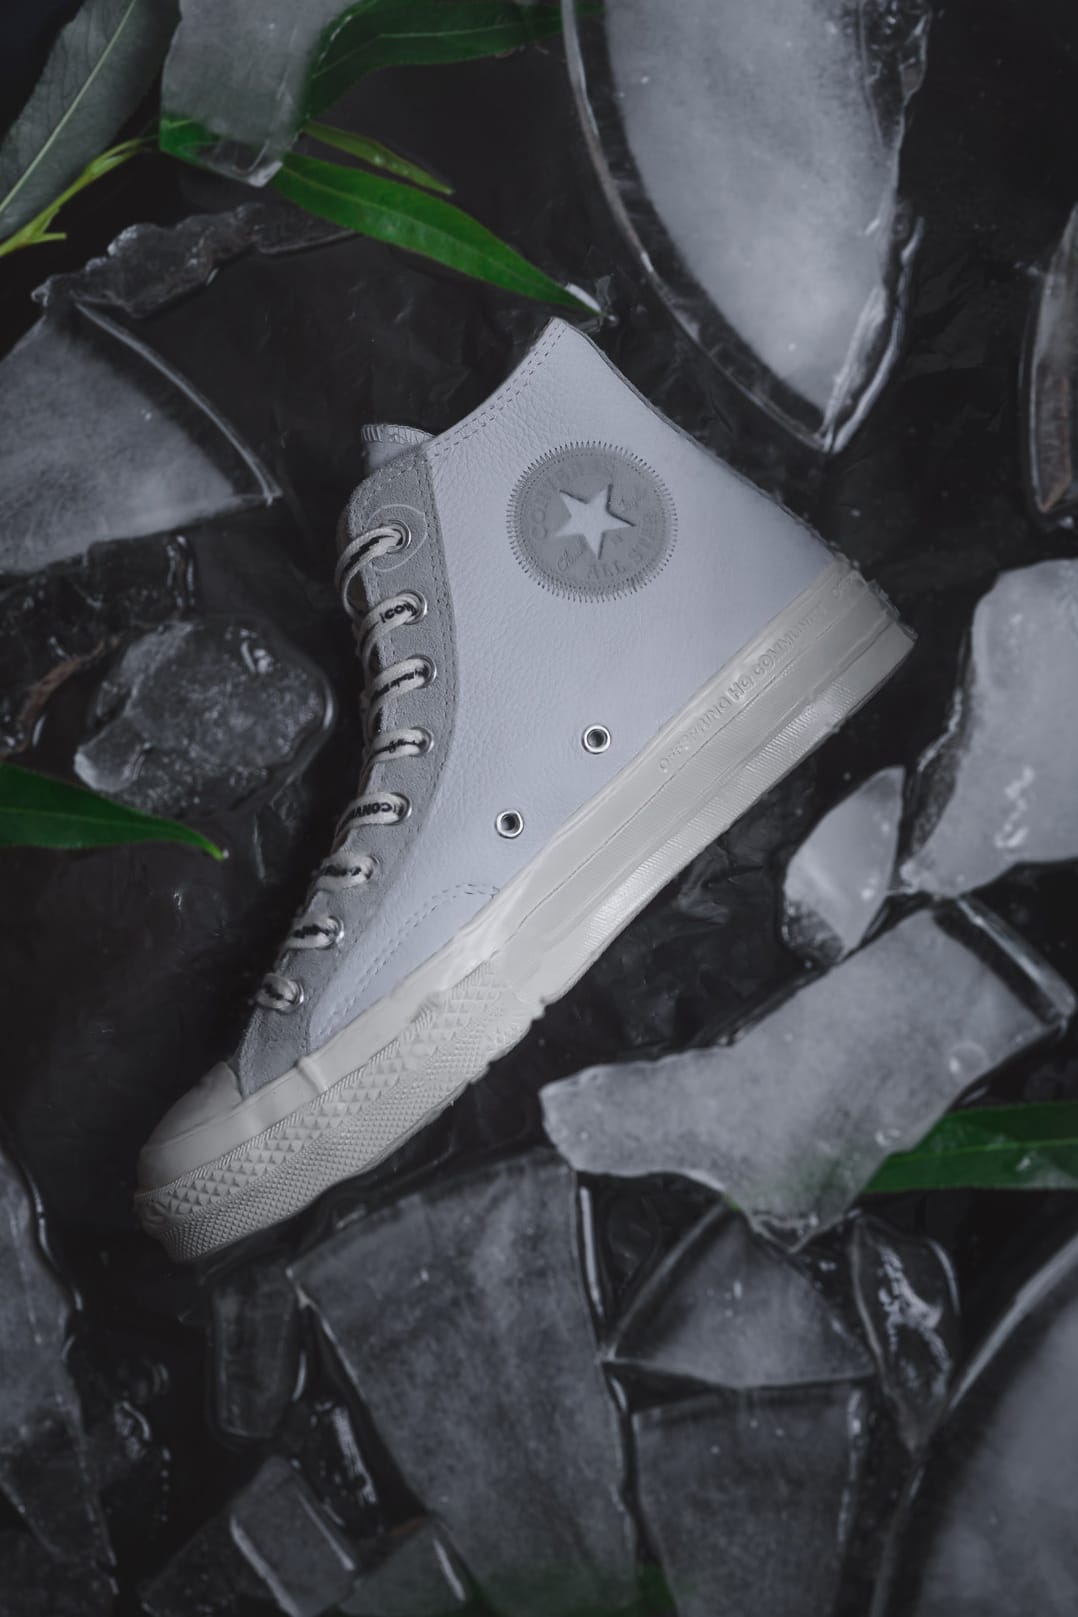 offspring converse community pack